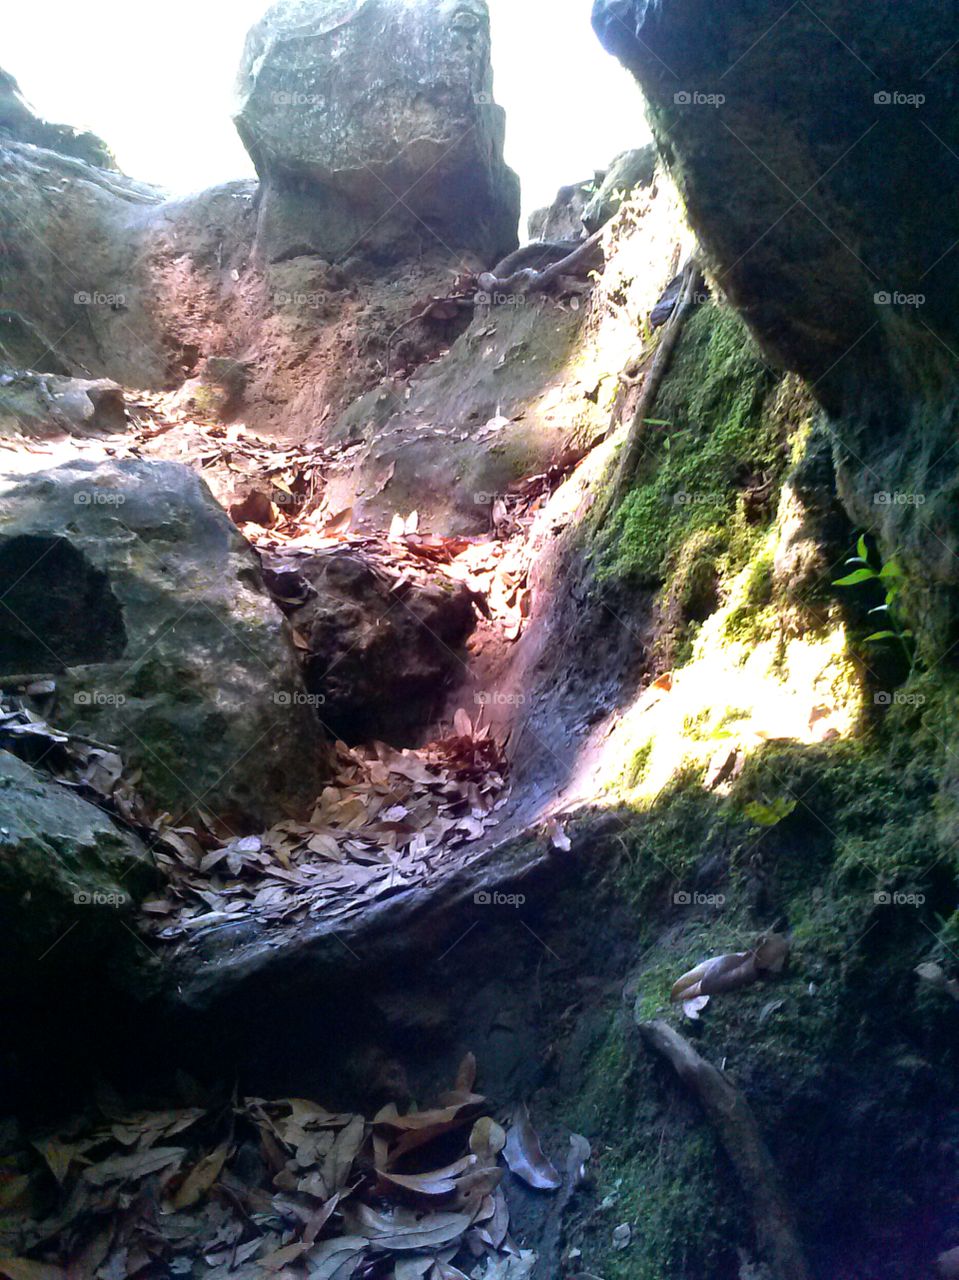 looking up. exiting underground cave